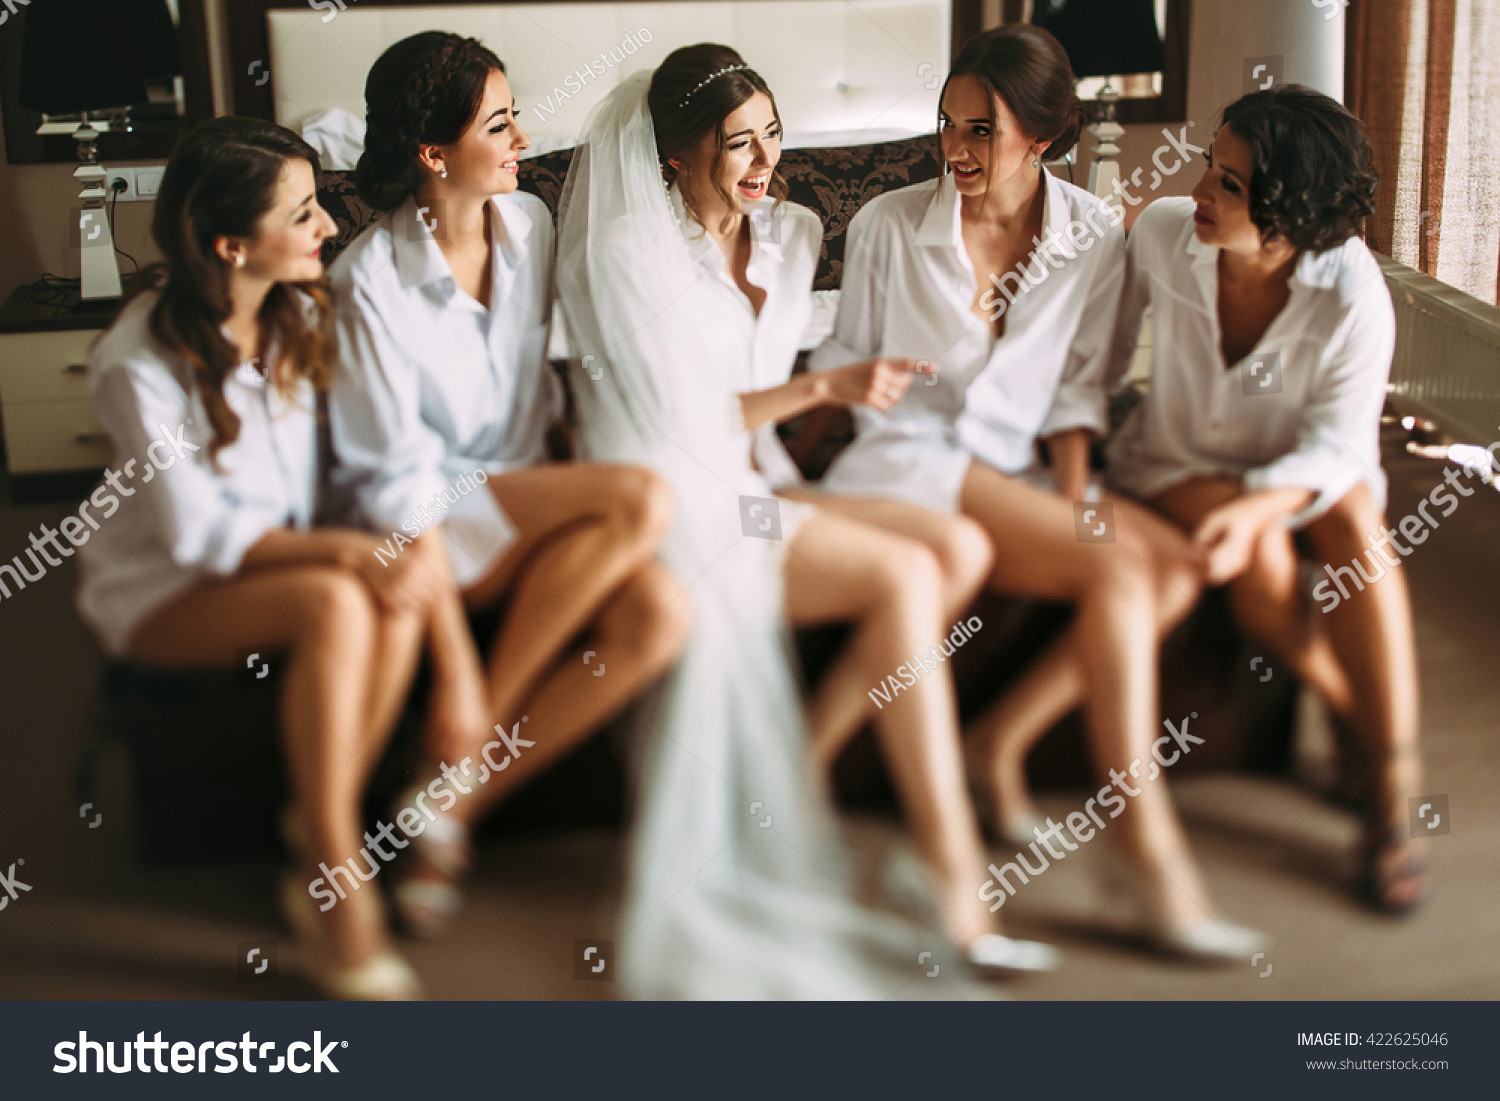 Bride and her friends have a nice conversation #422625046